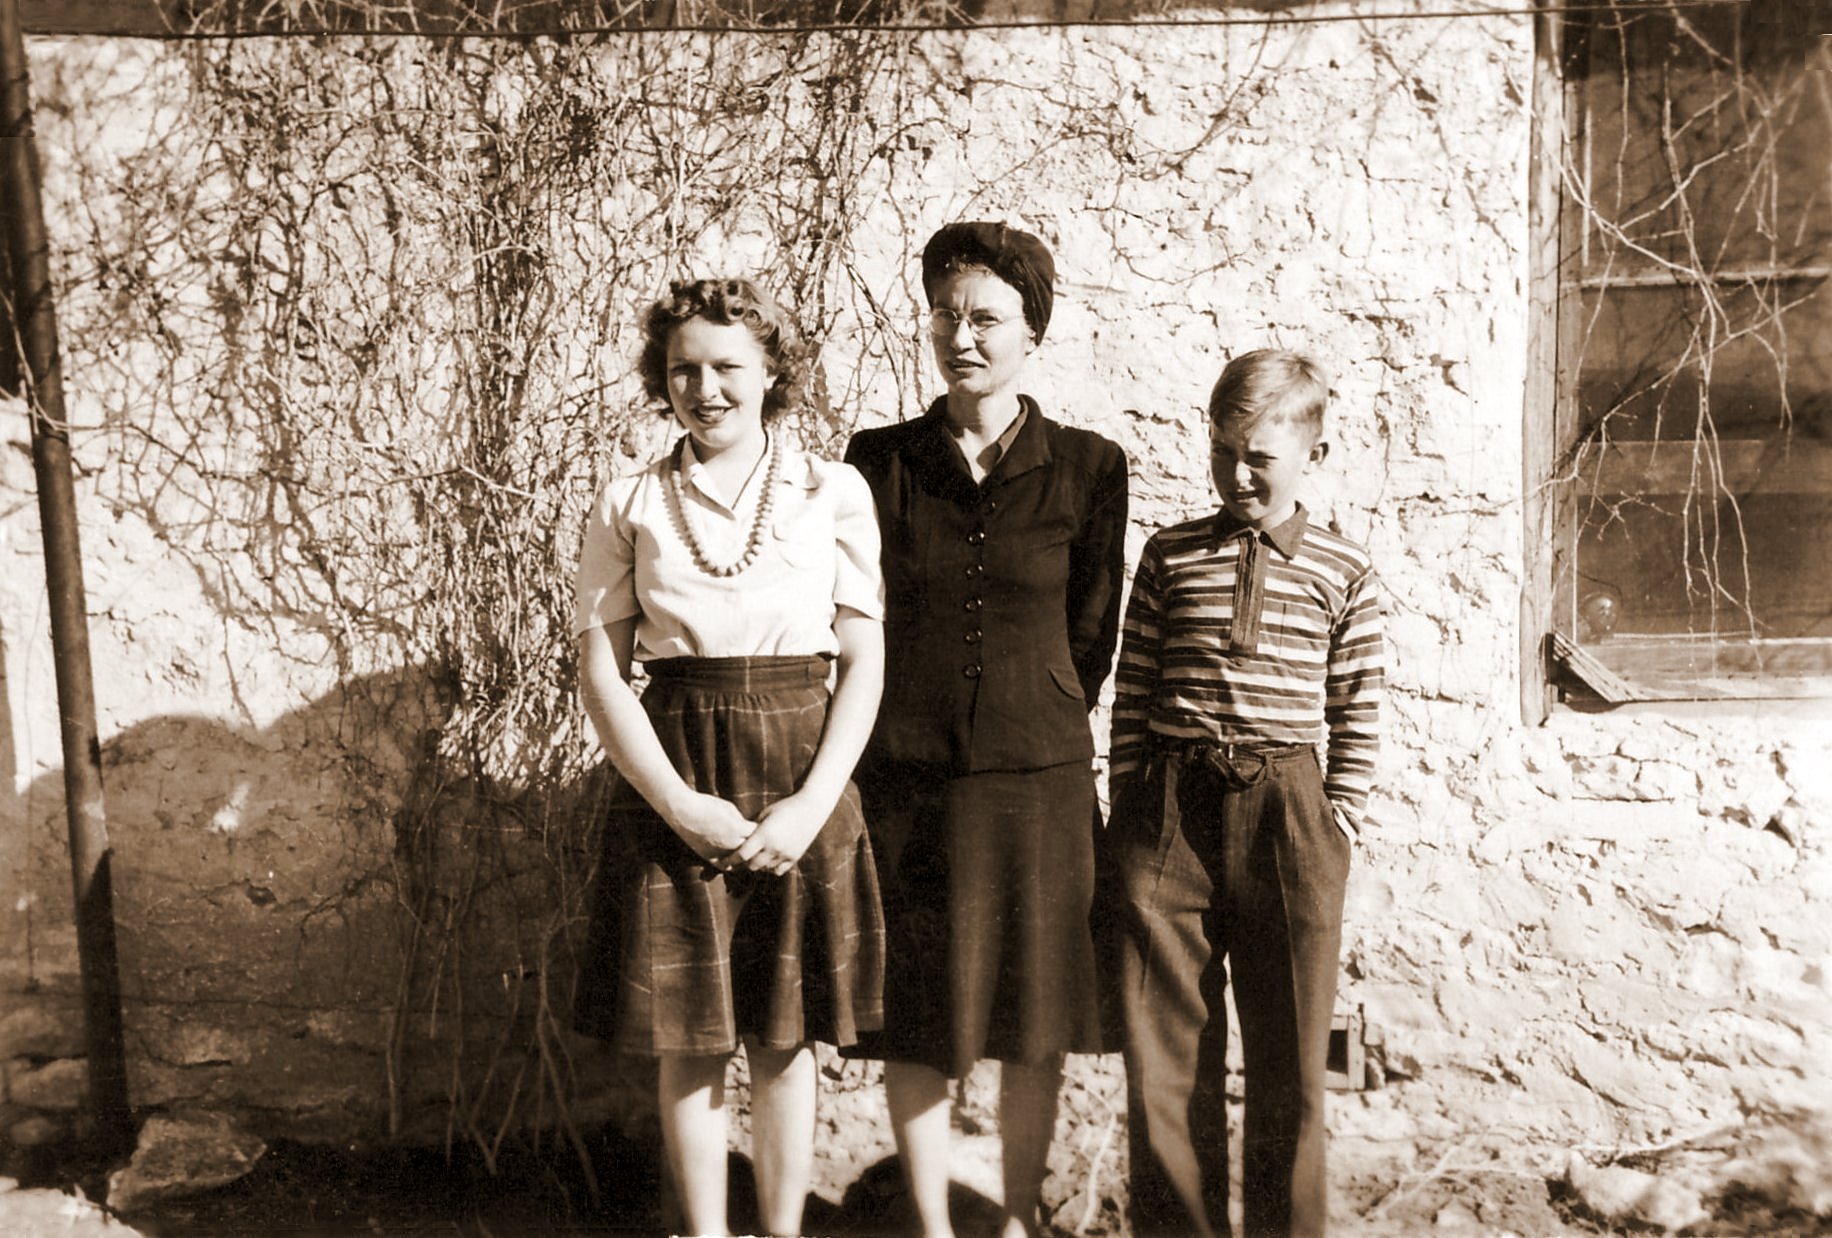 Elaine, Gertrude, and Rusty at the ranch, 1942